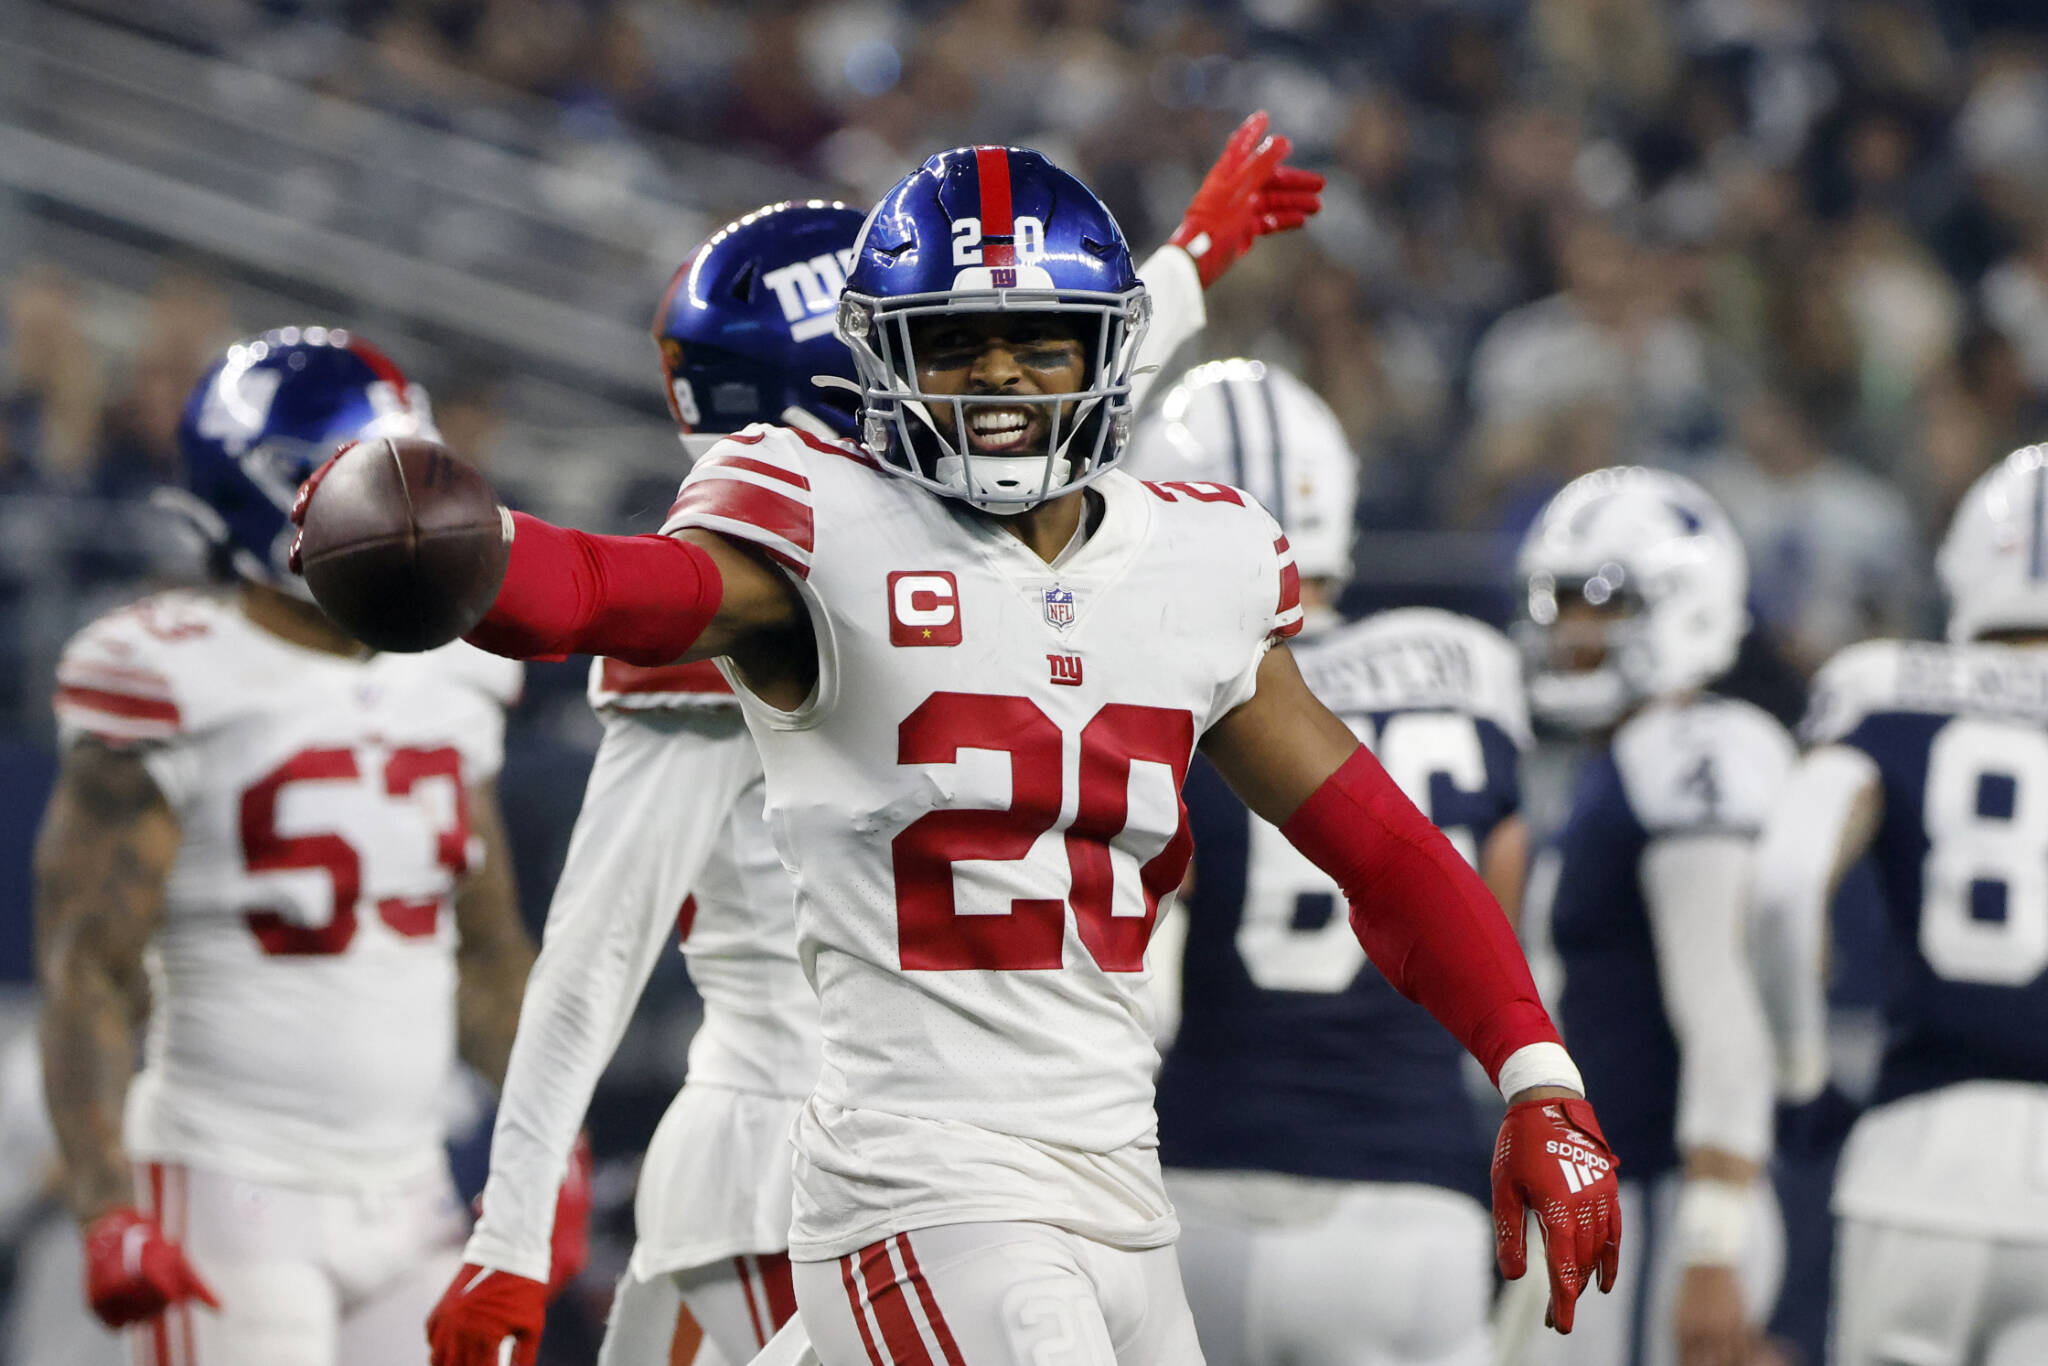 Giants safety Julian Love (20) celebrates after intercepting a pass against the Cowboys during a game on Nov. 24, 2022, in Arlington, Texas. (AP Photo/Michael Ainsworth)